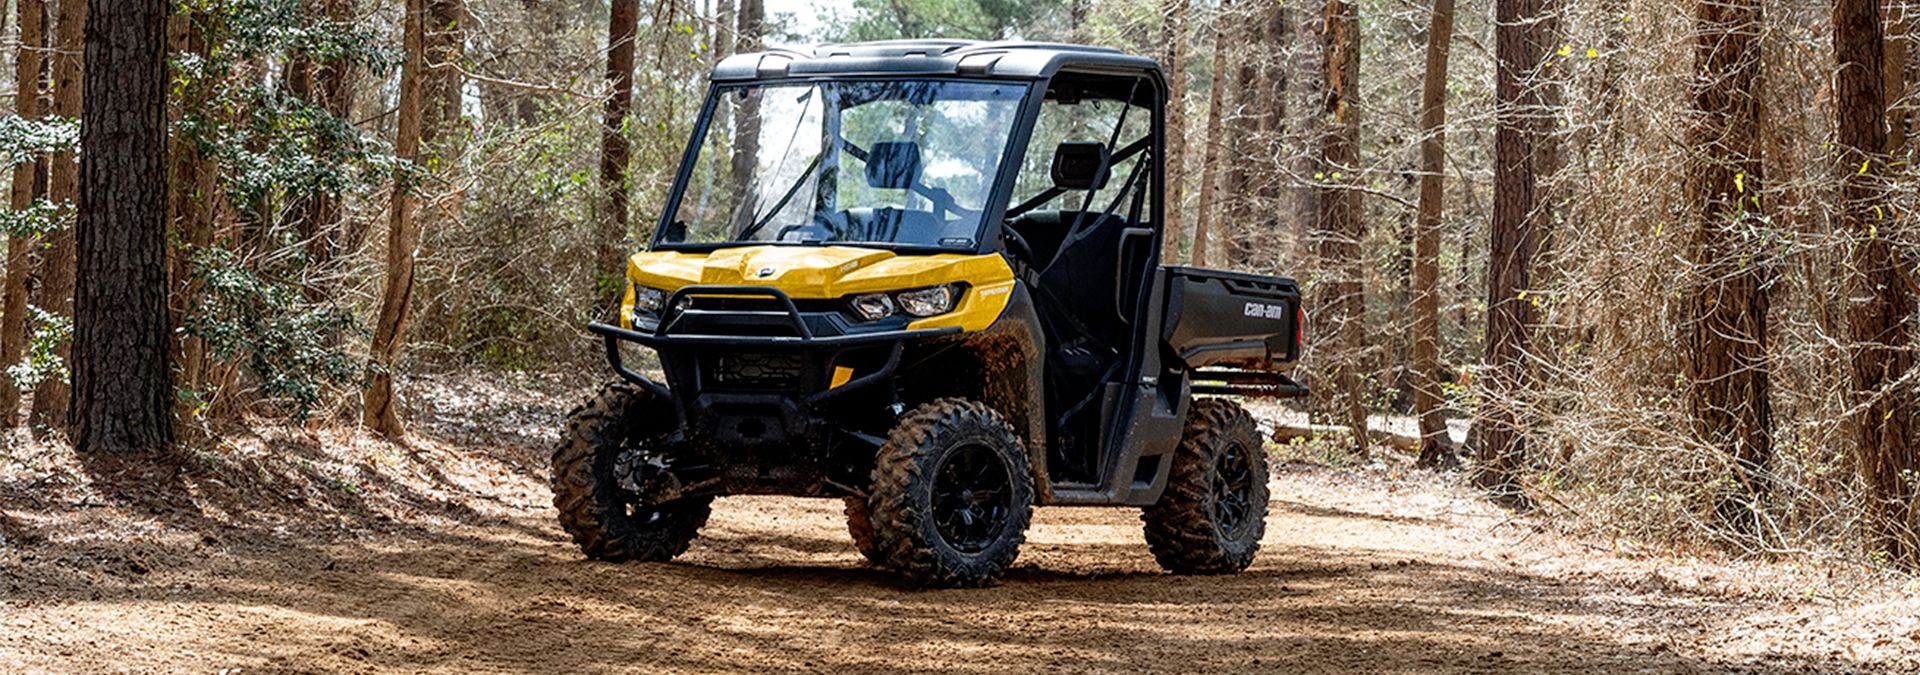 How to get the most out of your ATV or SSV this summer